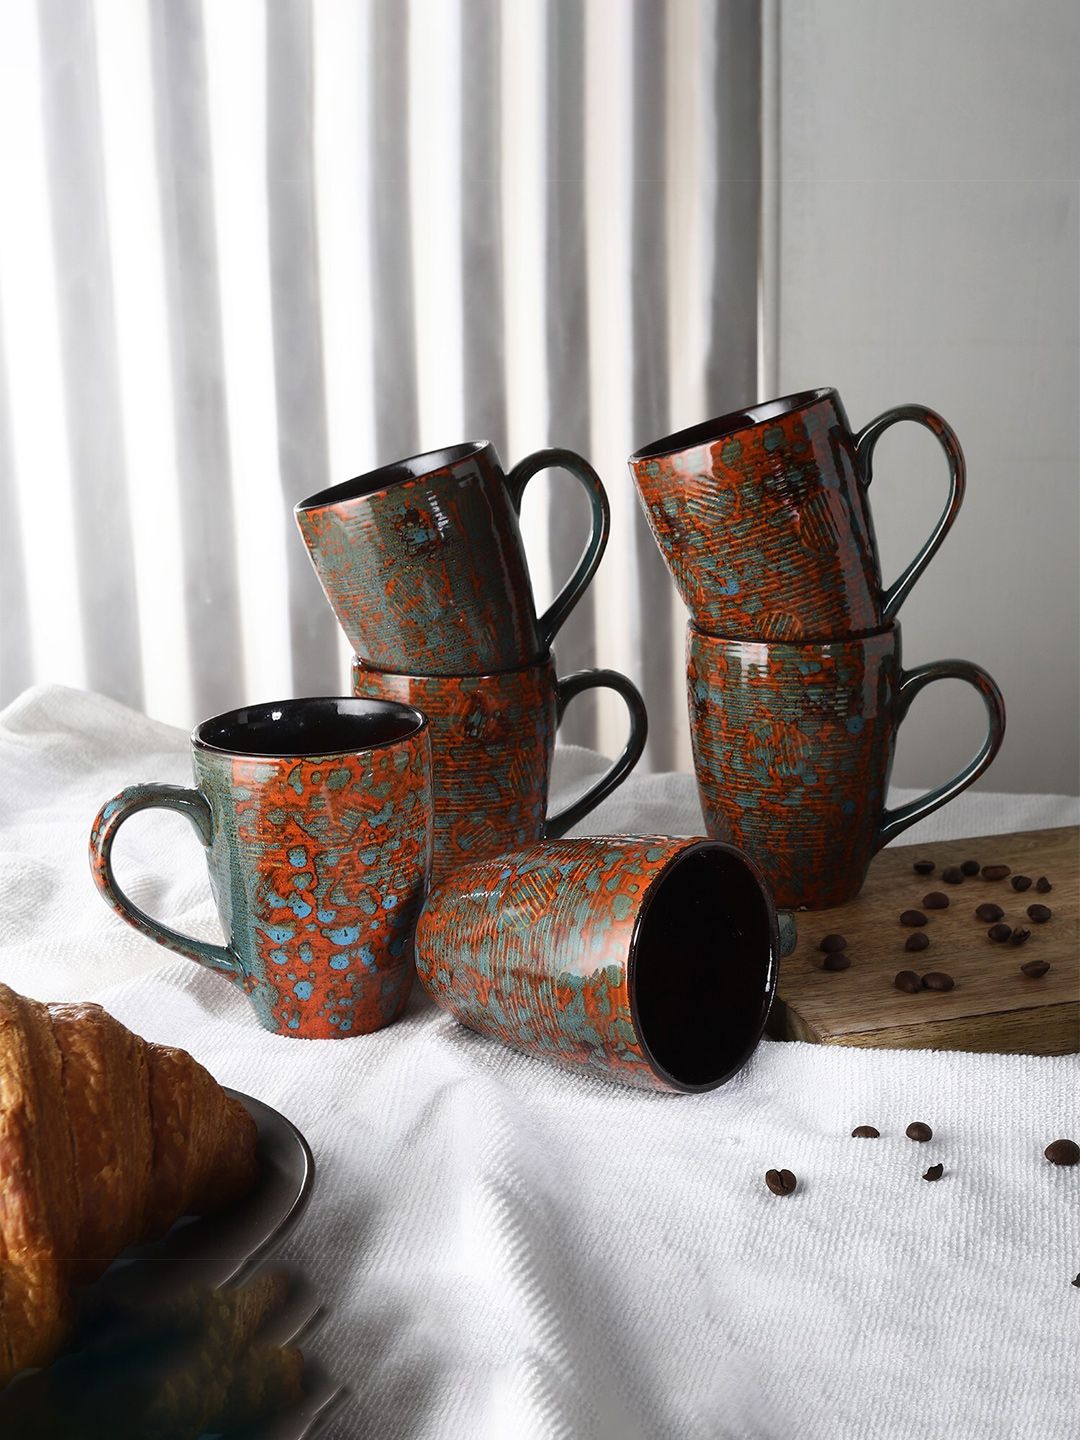 The Decor Mart Set-6 Orange & Black Textured Ceramic Glossy Cups and Mugs Price in India